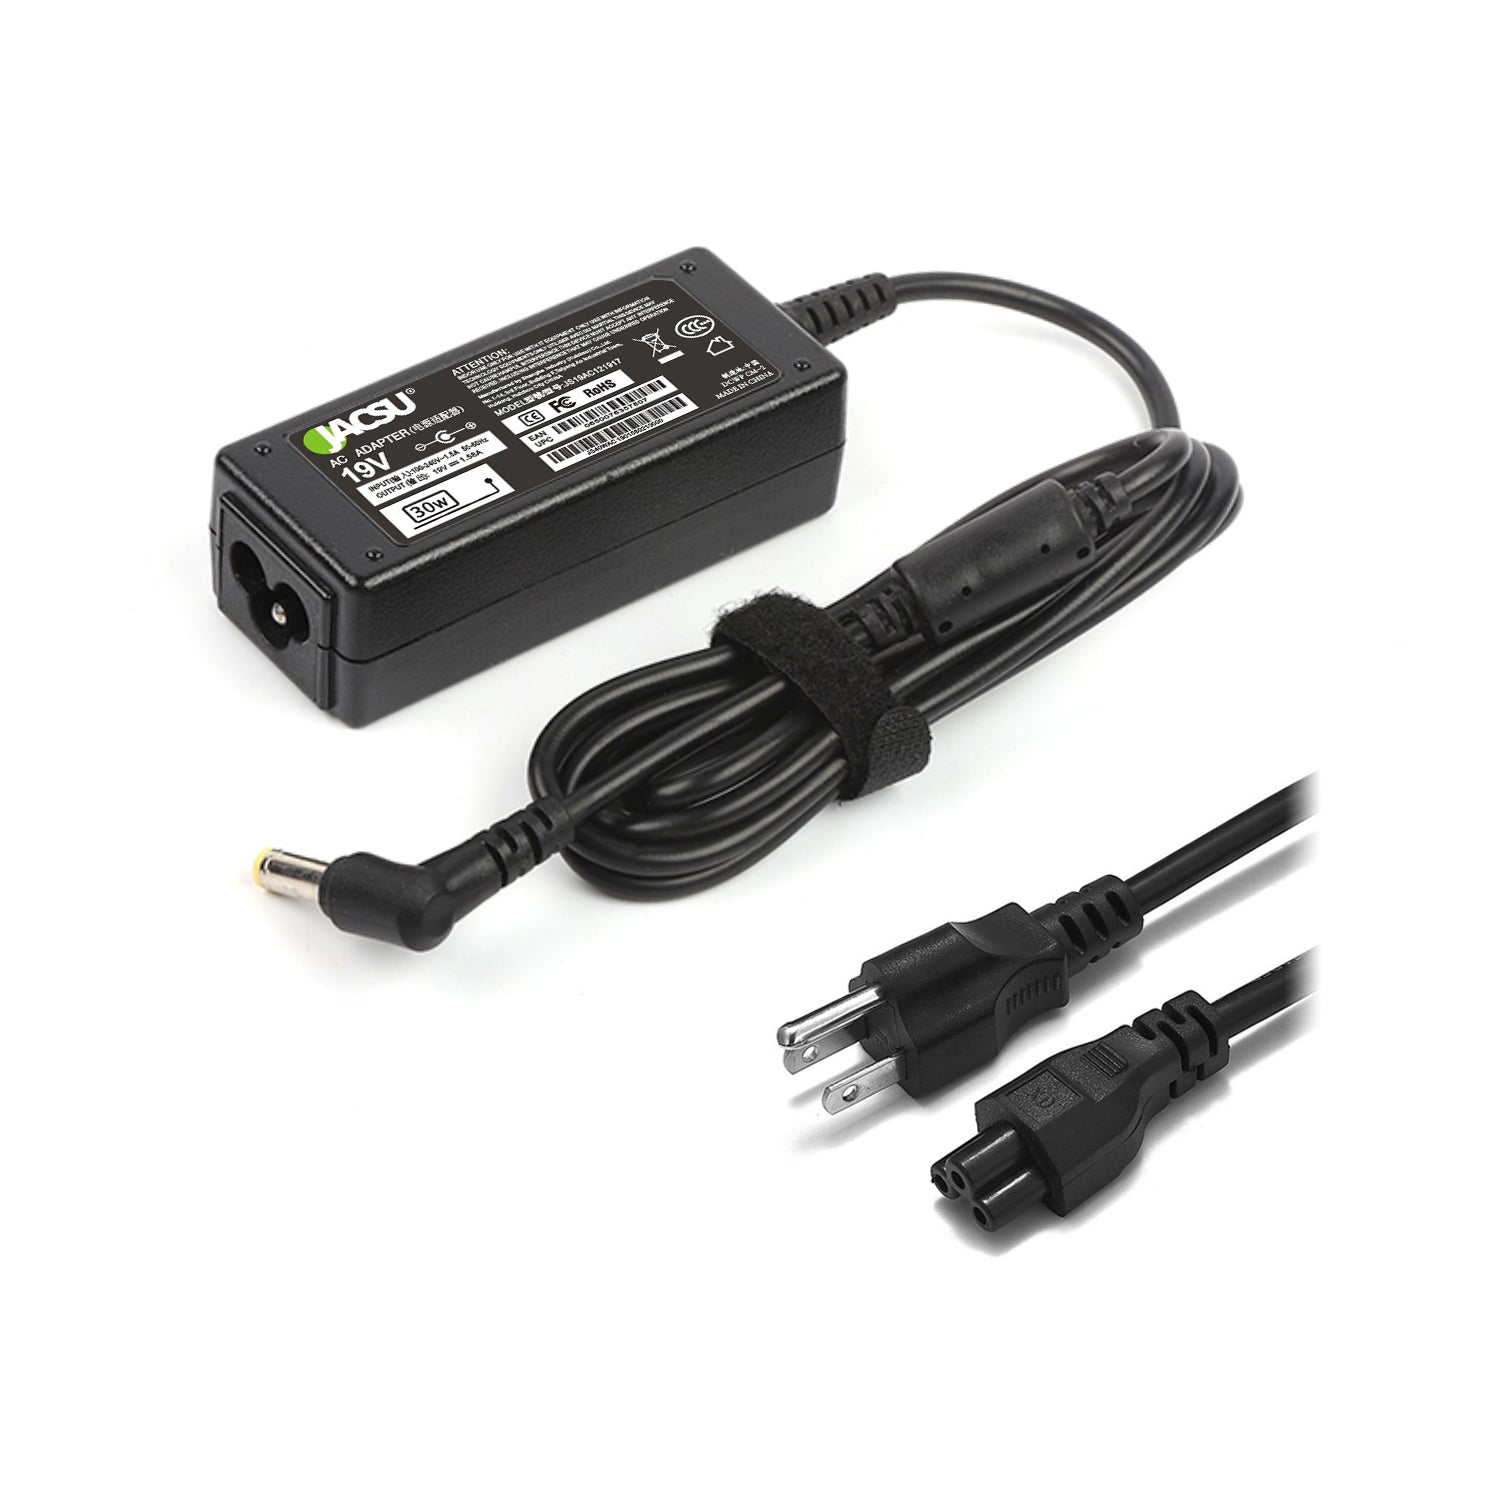 Jacsu 19V 1.58A 5.5*1.7mm 30W Laptop Adapter Charger For Acer Aspire One - 10.1" AOD150-1739 8.9" AOA150-1126